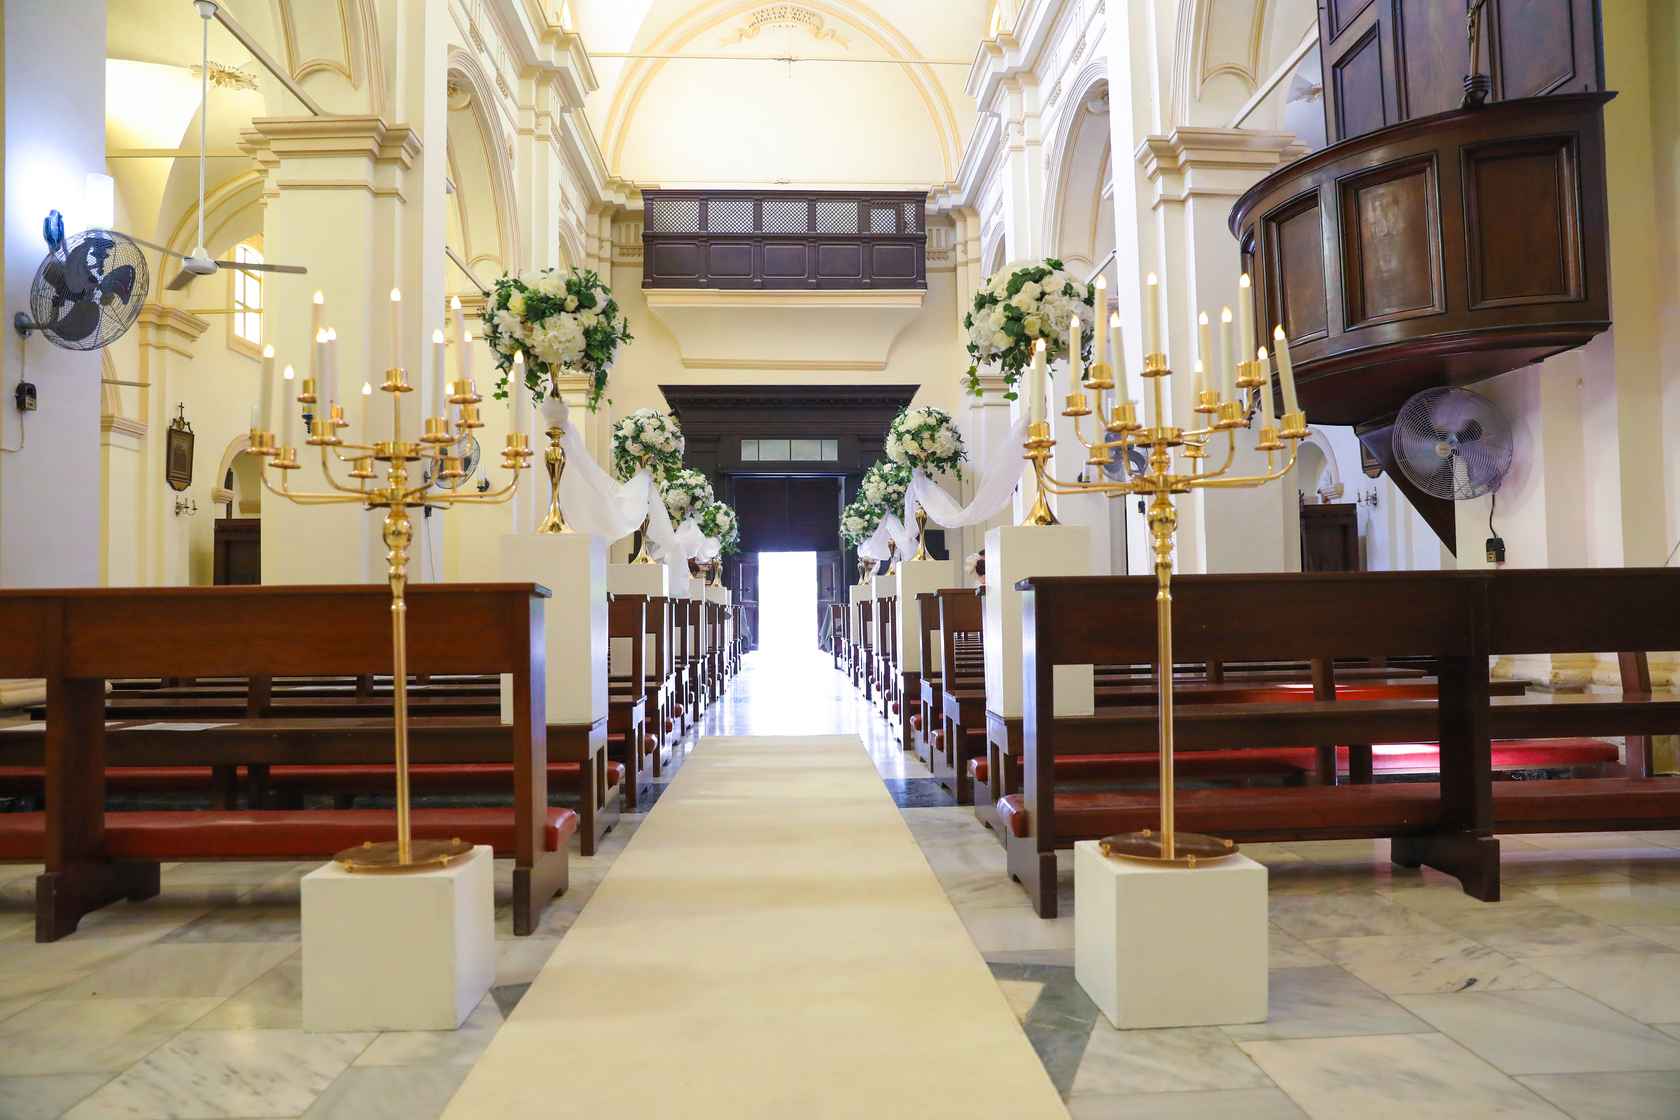 Book your wedding day in St Mary of Graces Catholic Church